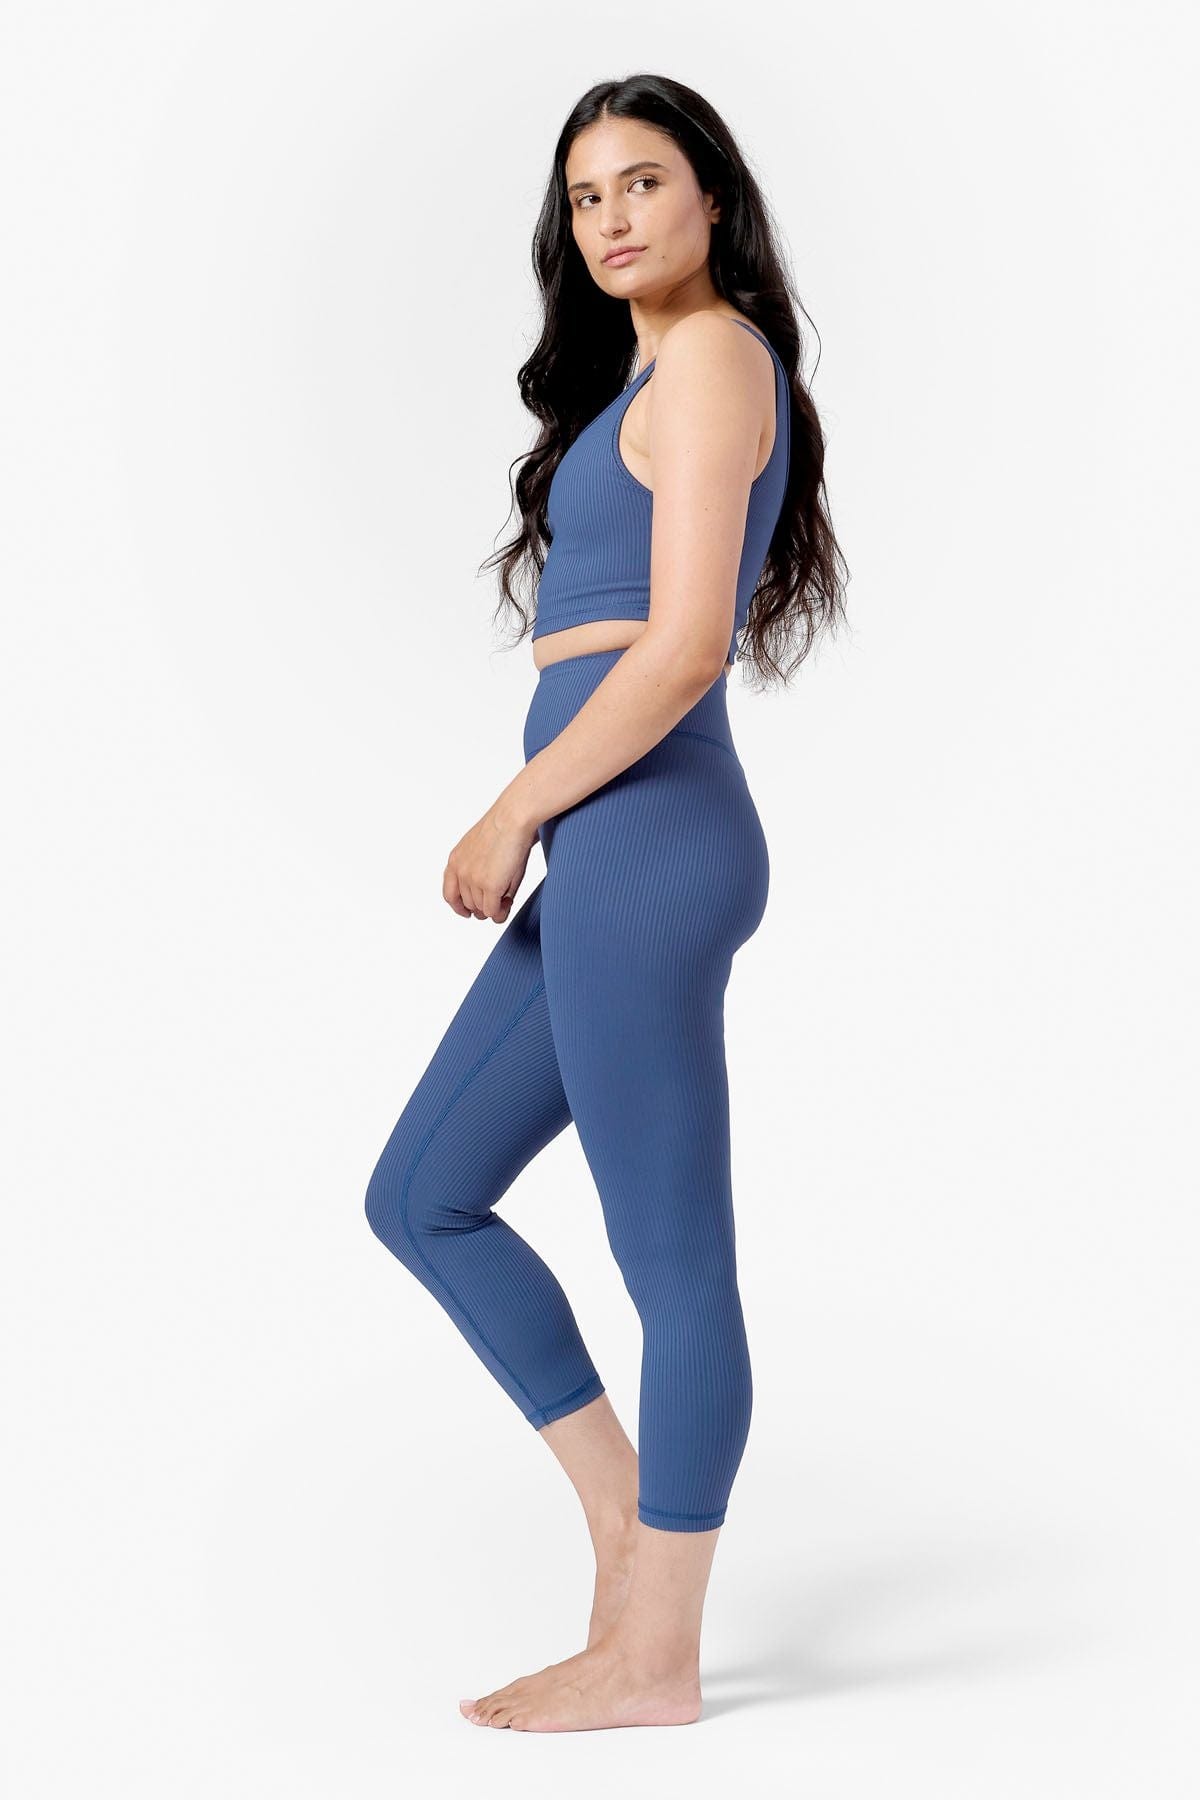 a woman's side view wearing a blue ribbed sports bra and blue ribbed mid length legging